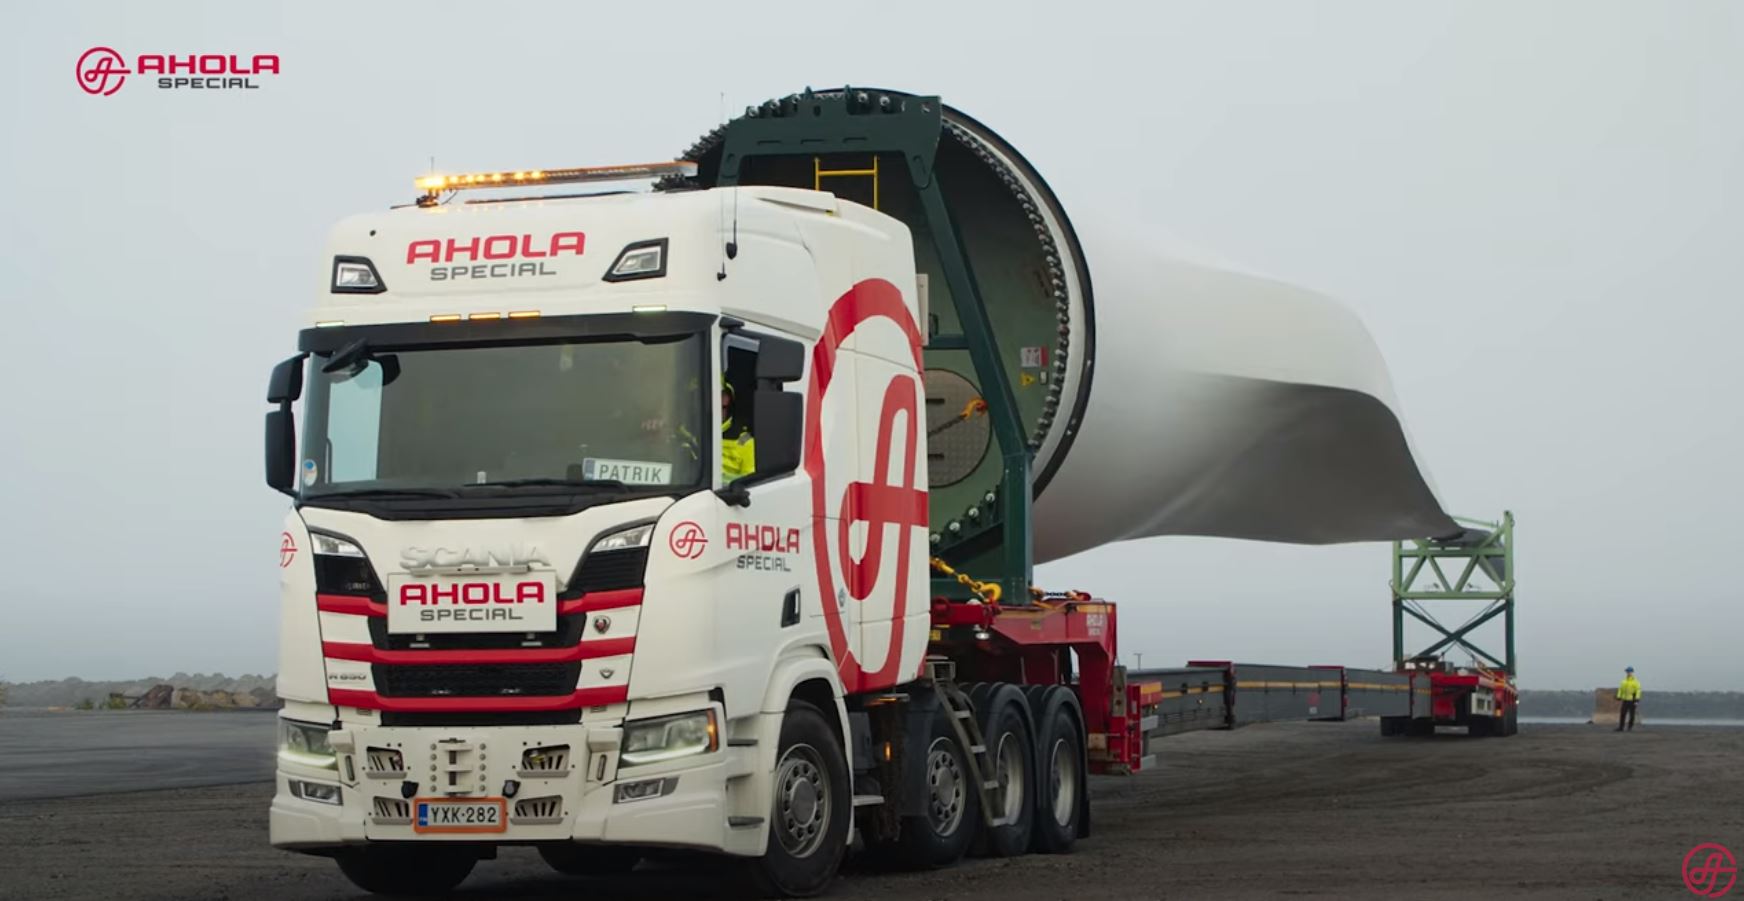 Ahola Special – The journey of a turbine blade